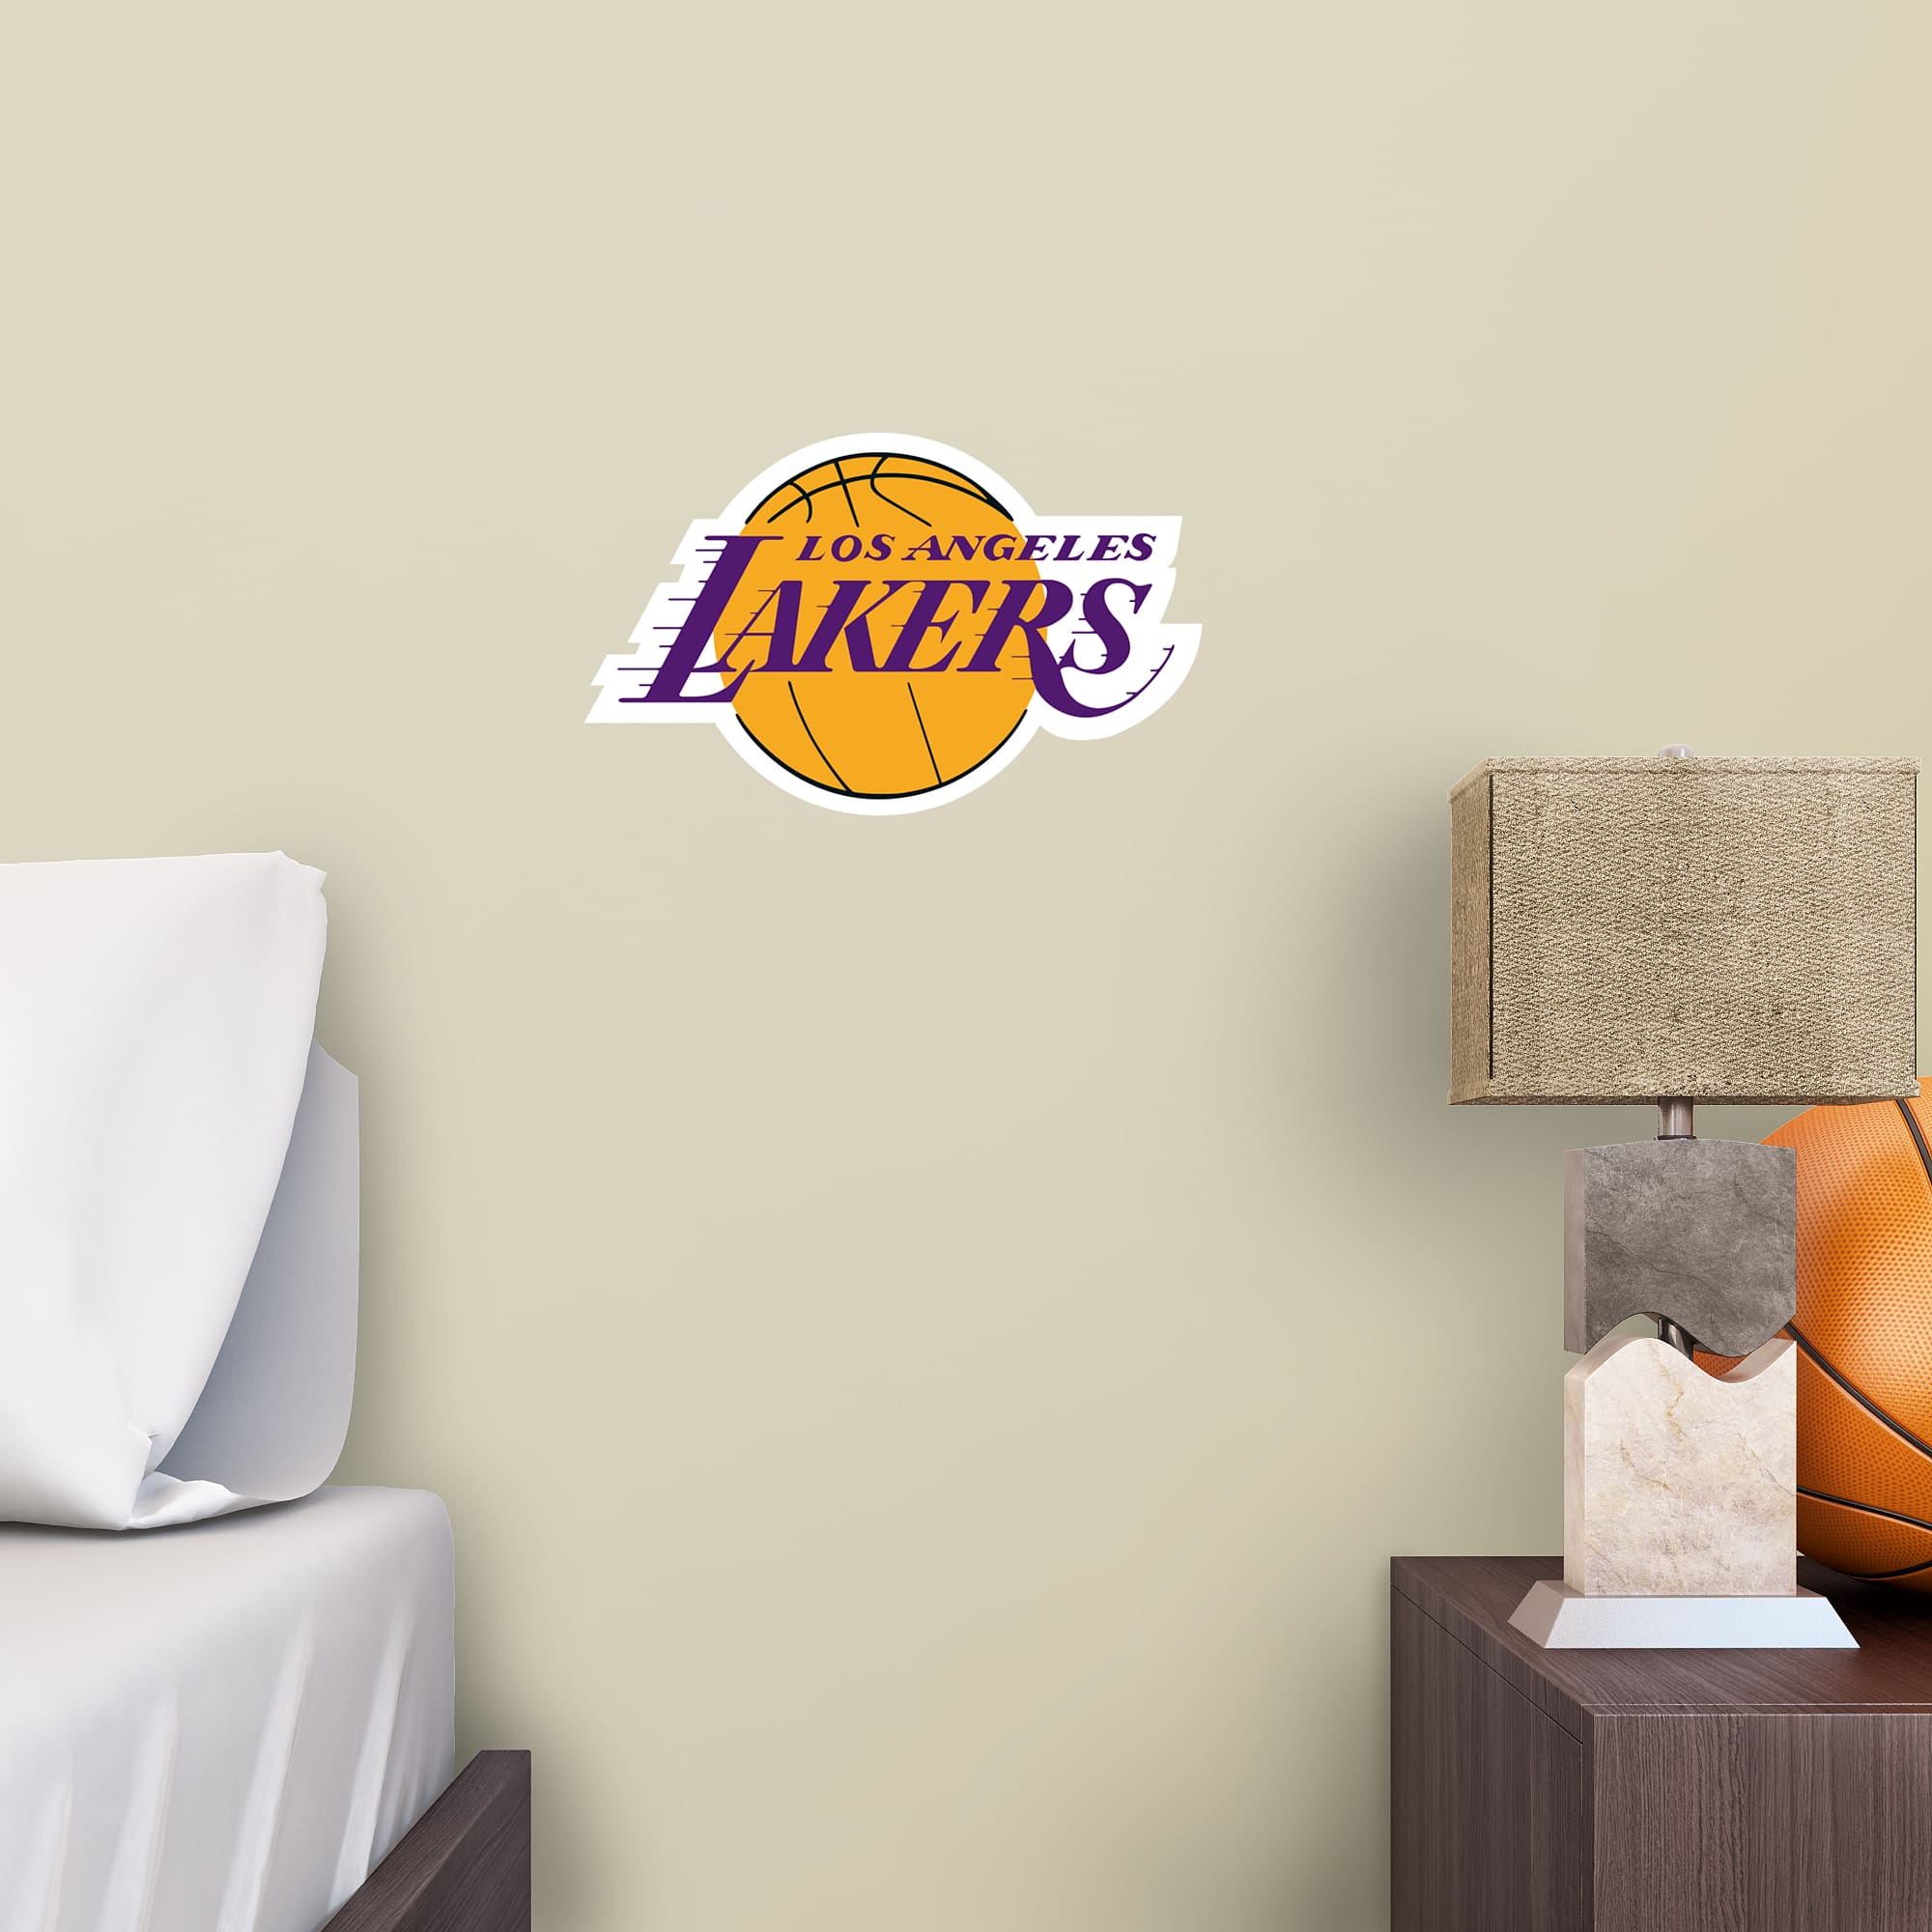 Los Angeles Lakers: Logo - Officially Licensed NBA Removable Wall Decal Large by Fathead | Vinyl